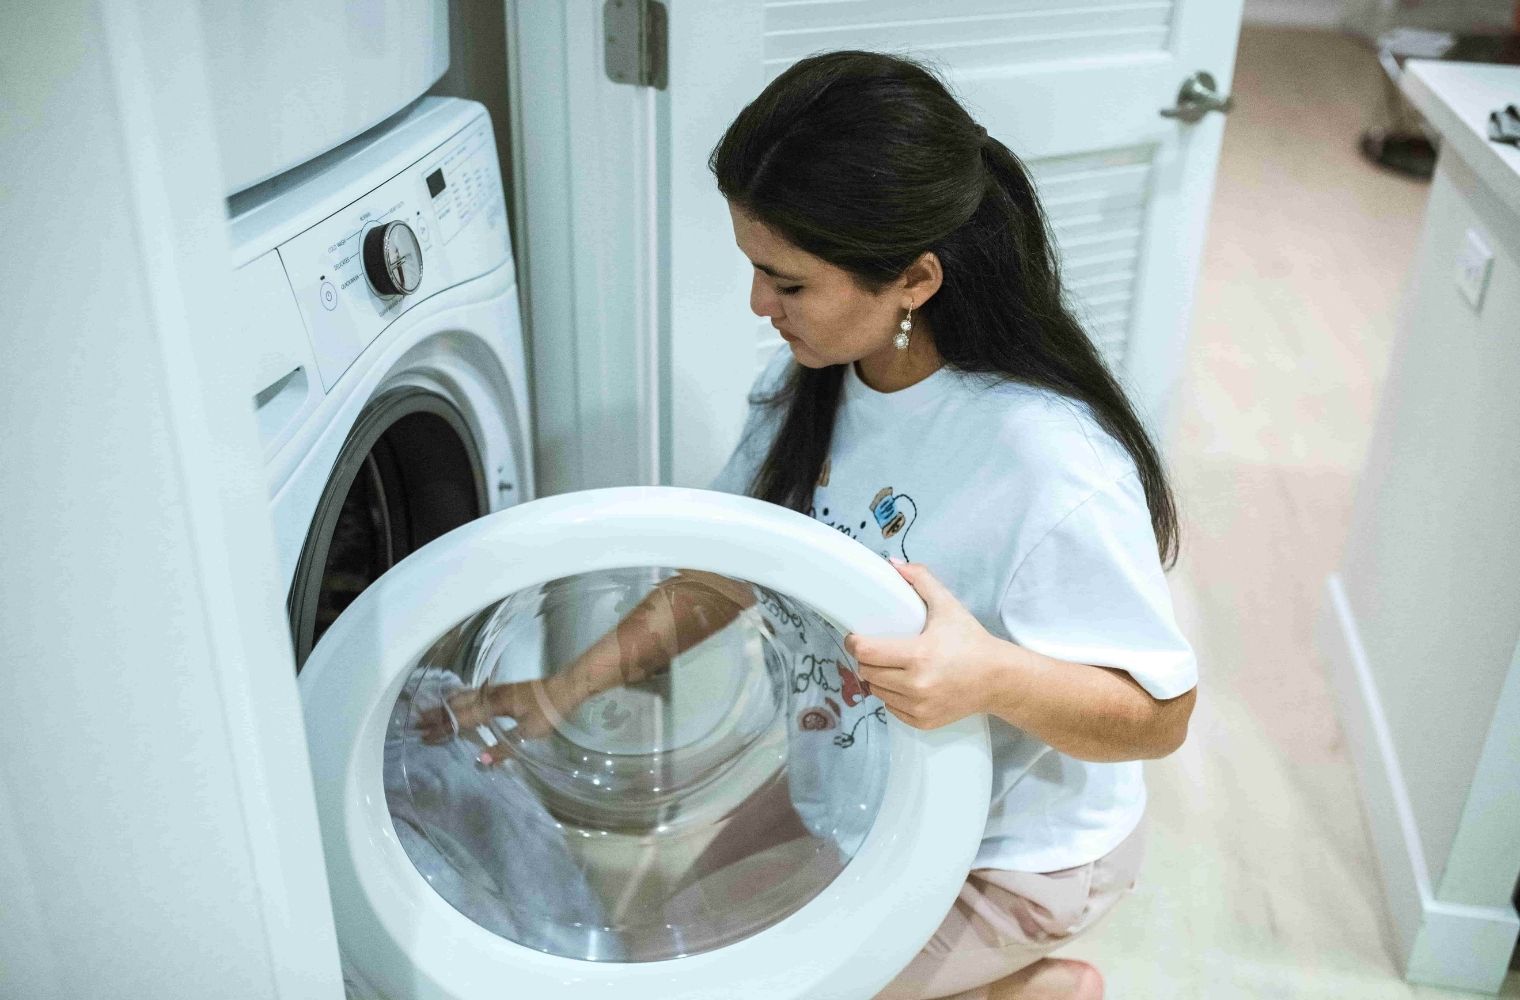 Woman doing a load of laundry